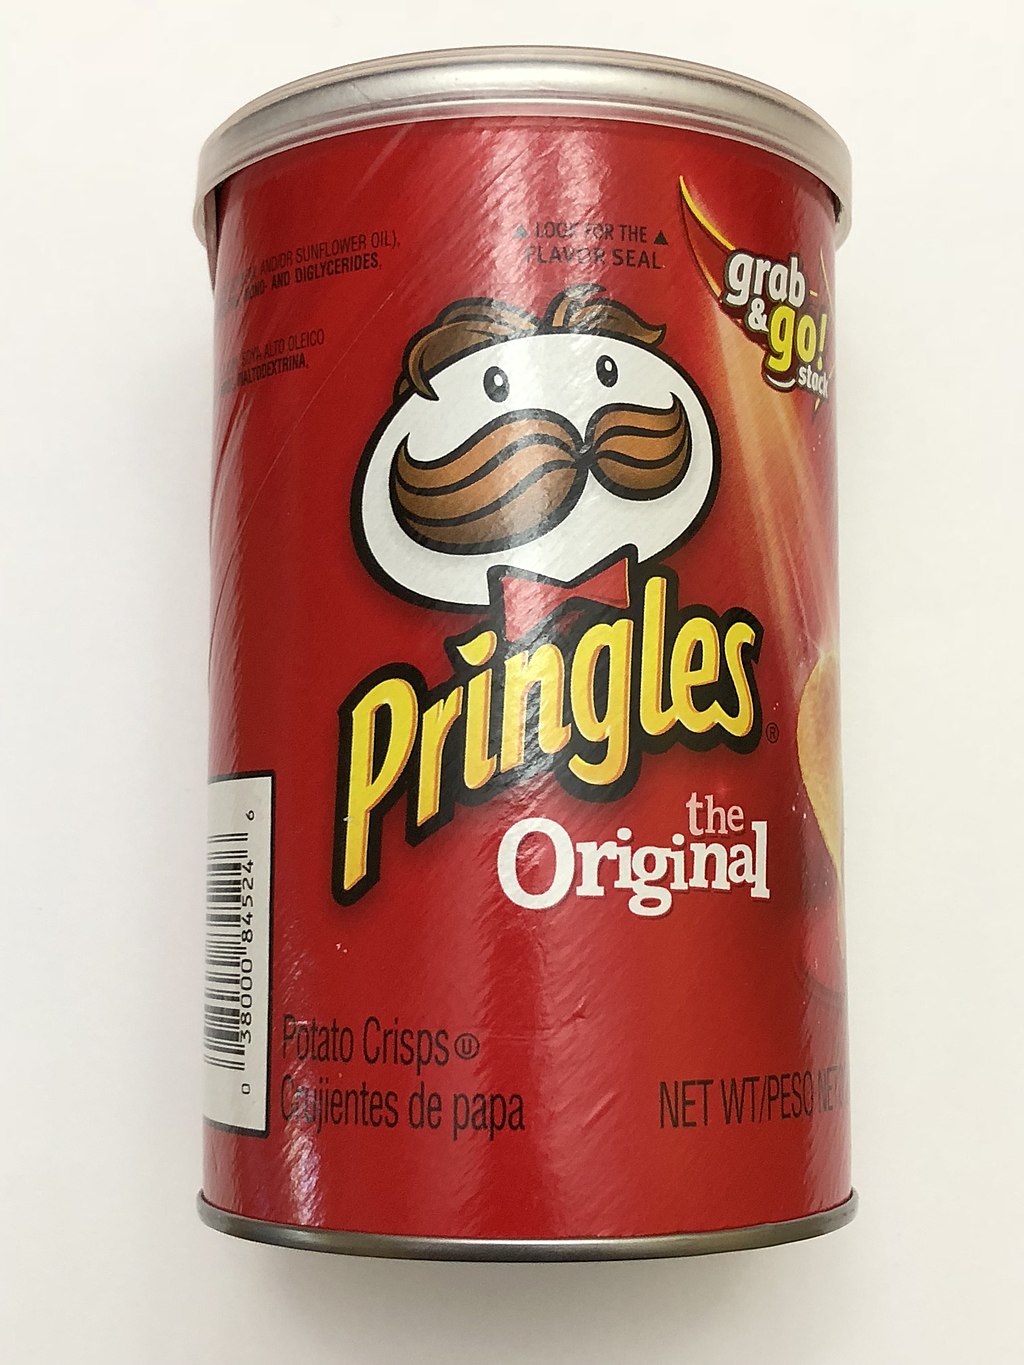 Why we can thank the U.S. Army for Pringles